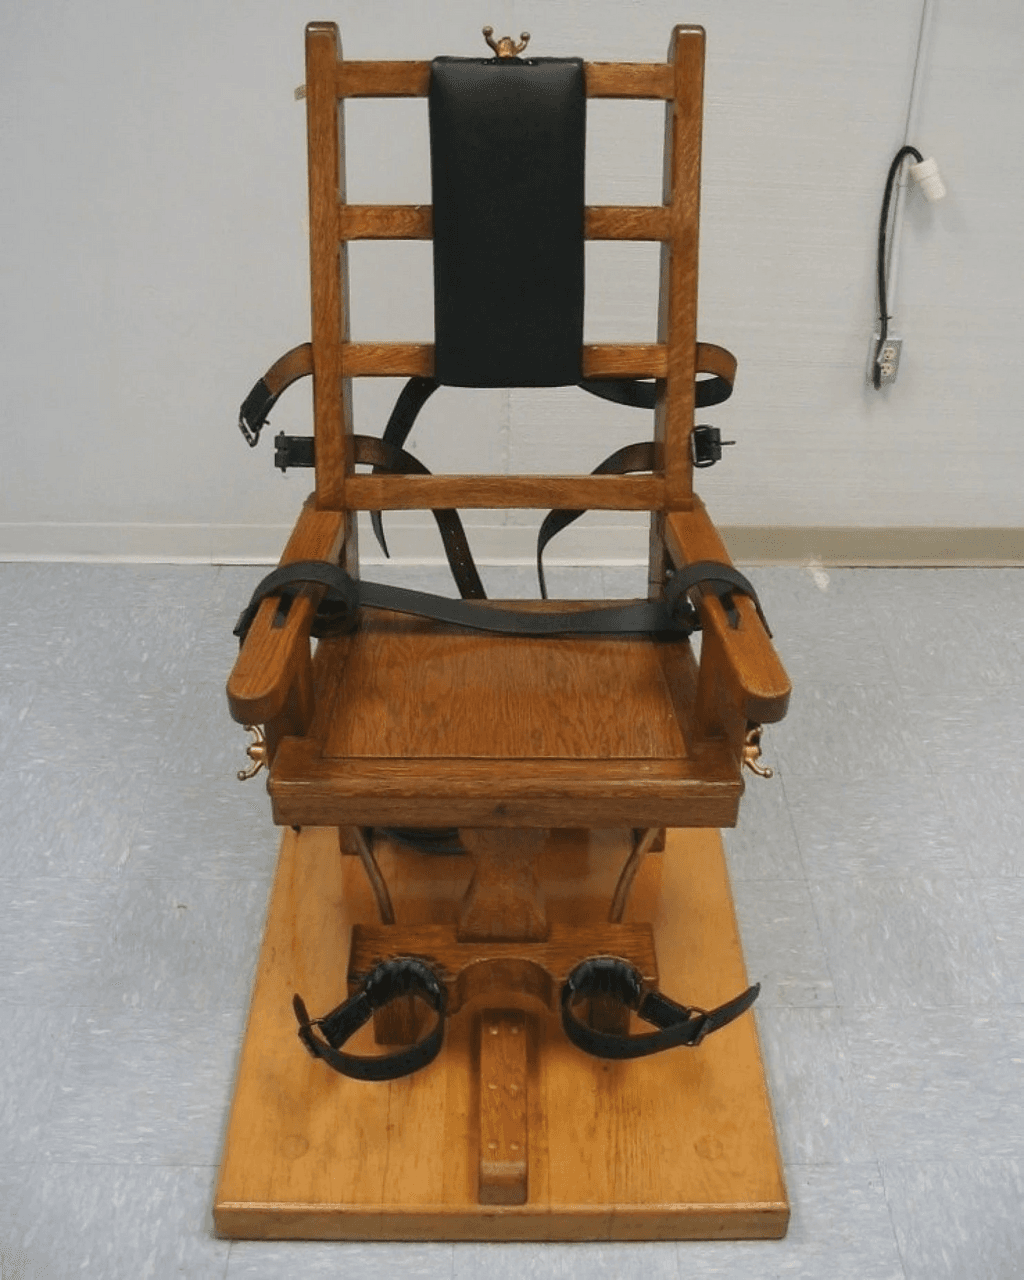 South Carolina Legislature Authorizes Use of Electric Chair and Firing Squad as State Reaches 10 Years Without an Execution